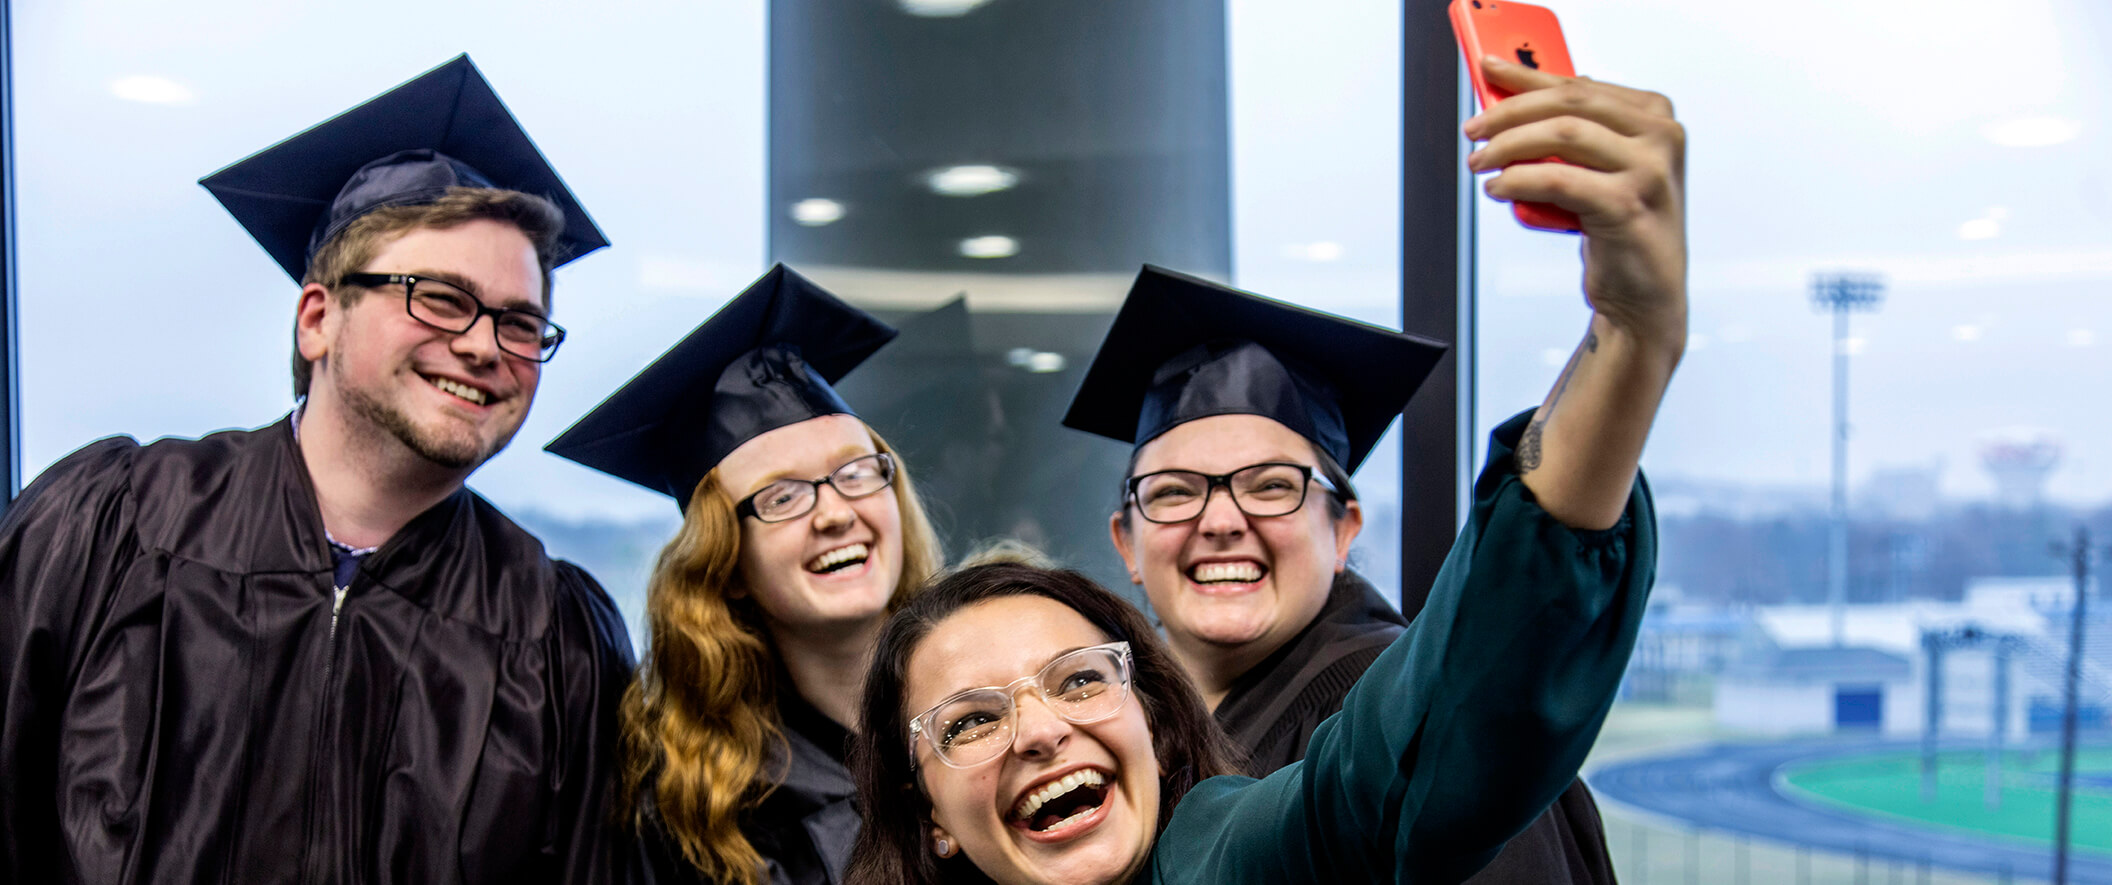 Three graduates and a friend taking a selfie on a cell phone